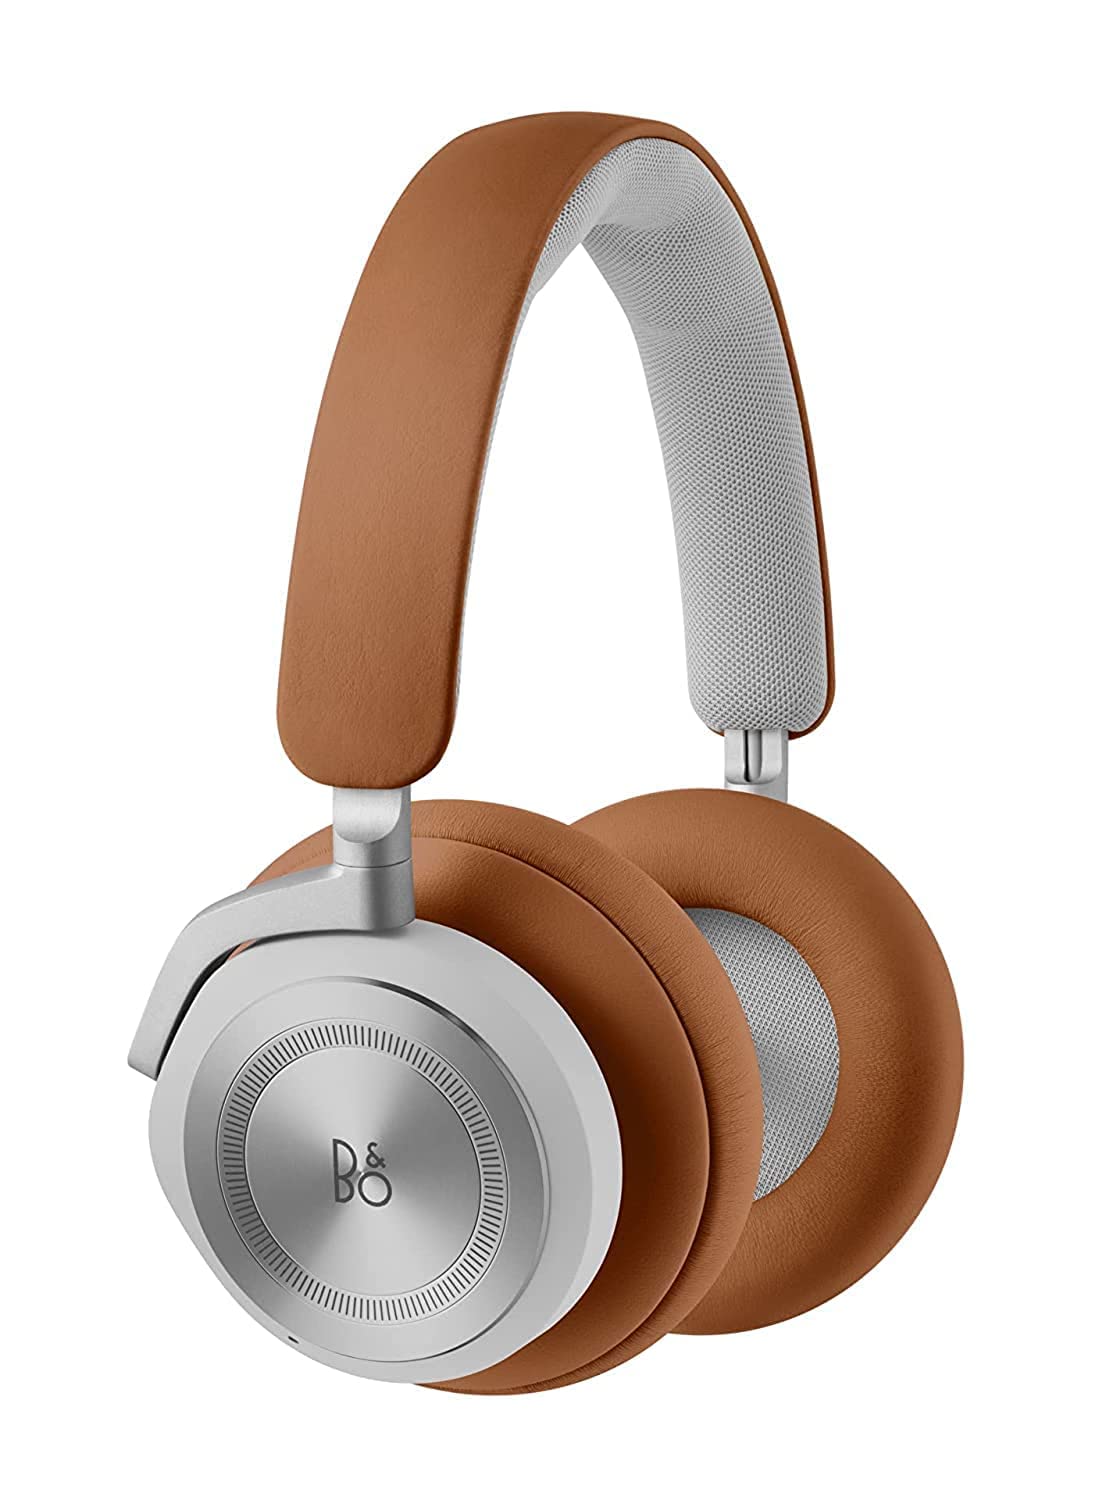 Bang & Olufsen Casque supra-auriculaire ANC sans fil confortable Beoplay HX - Bois